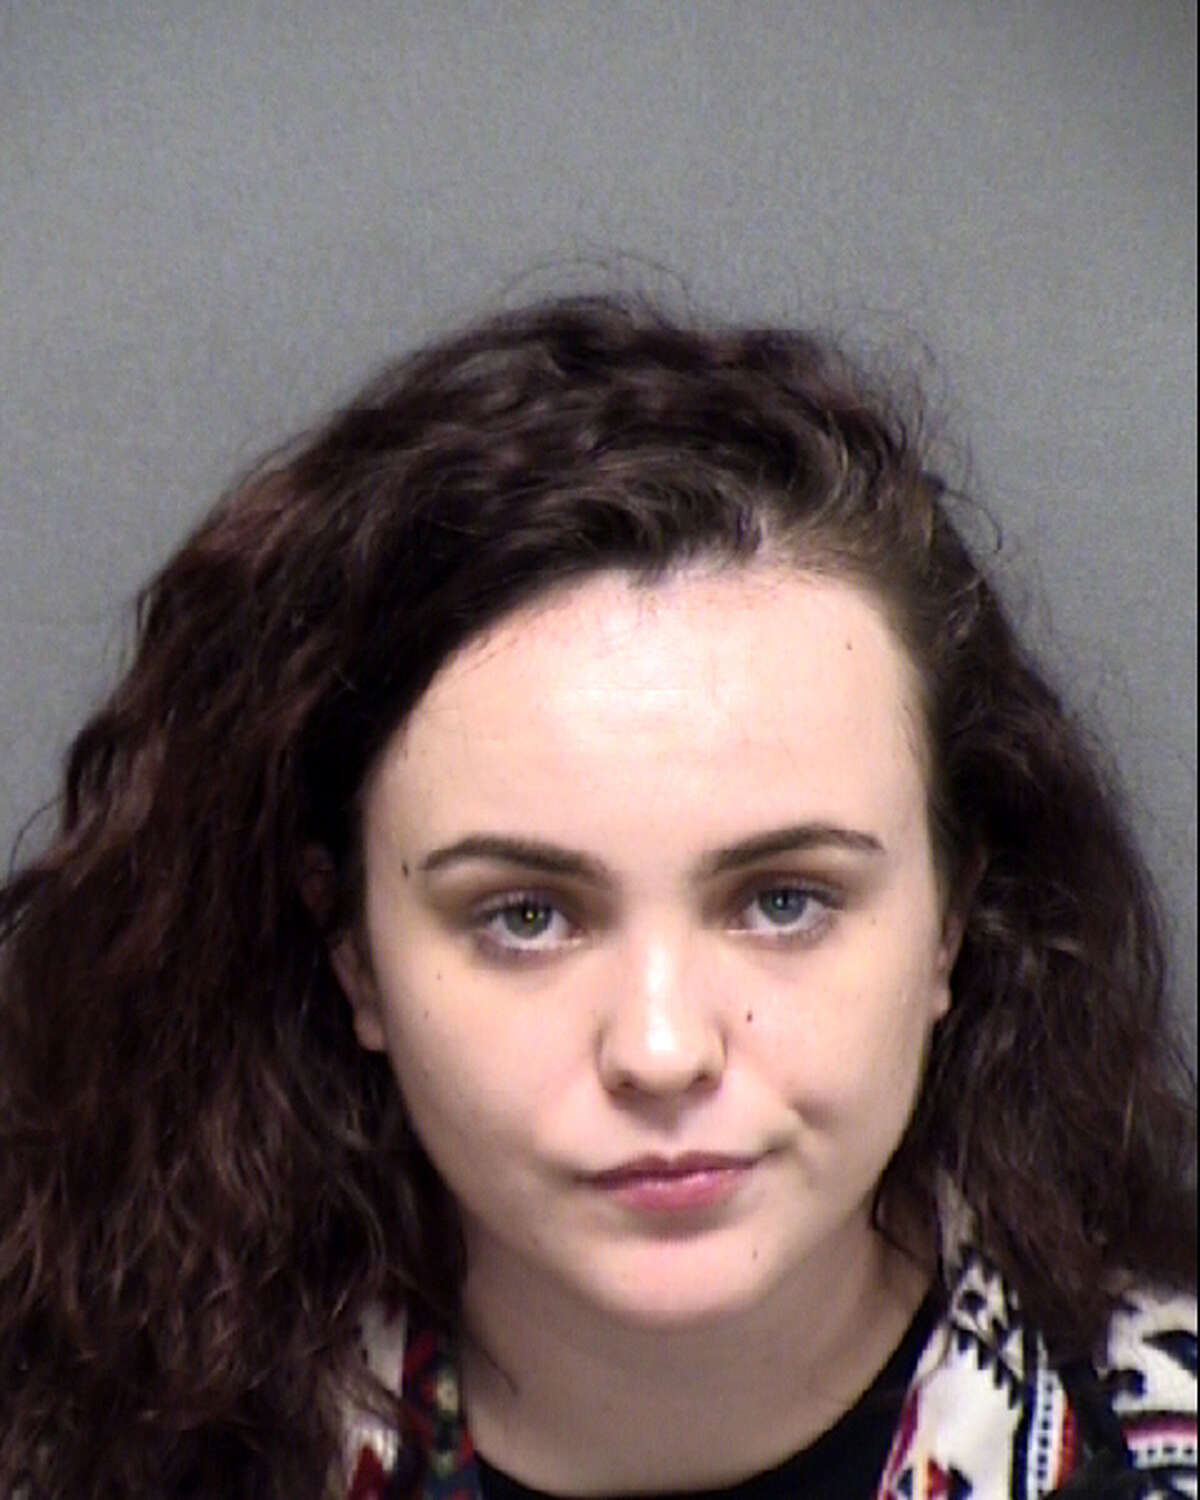 Lani Elizabeth Taylor, 22, was arrested Thursday and charged with cruelty to non-livestock animals after police said she did not properly care for her grandmother's dogs.